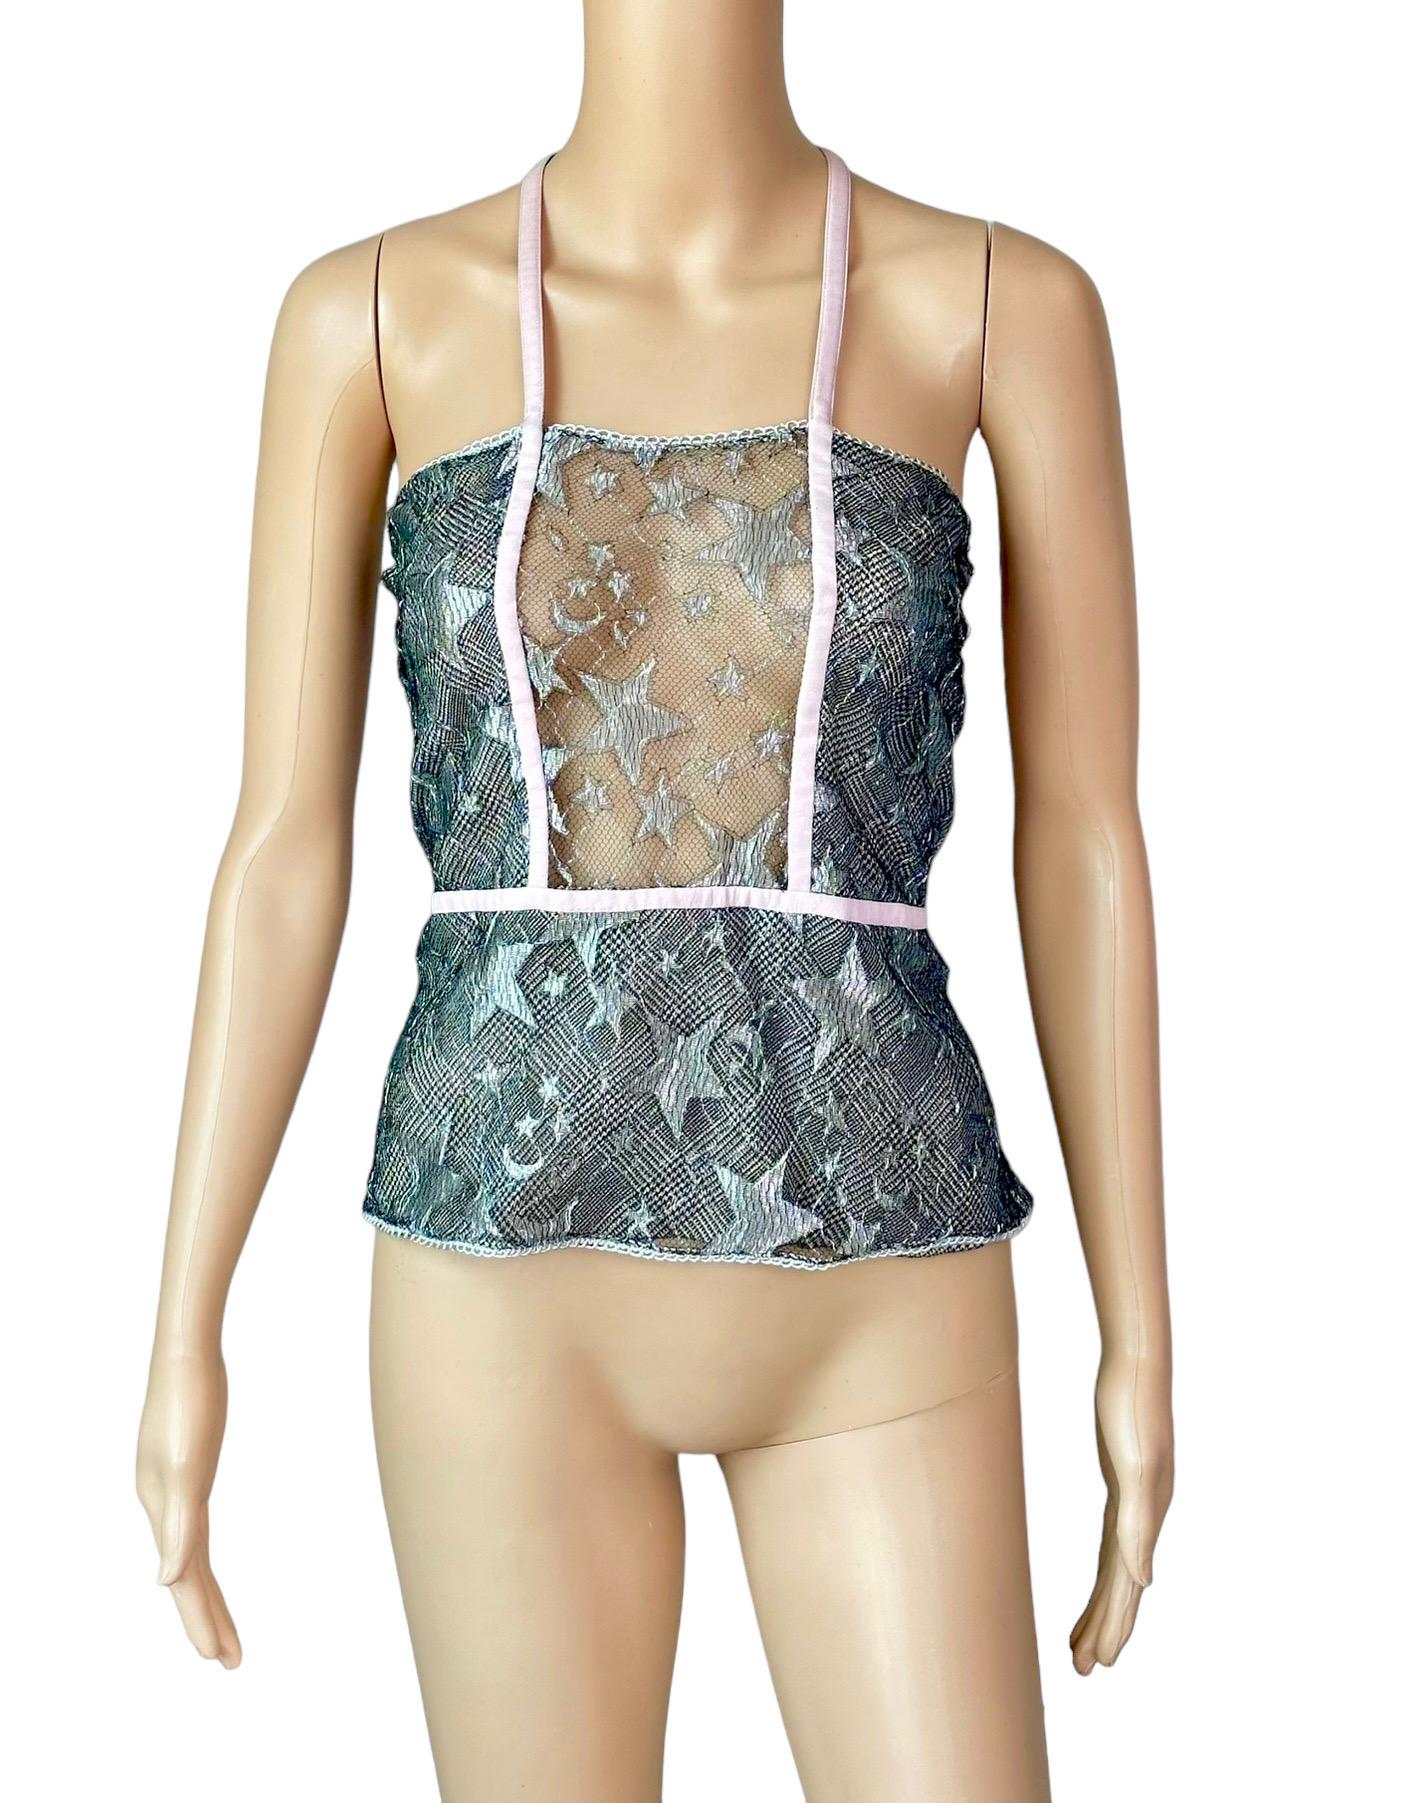 Gianni Versace S/S 1998 Runway Sheer Lace Star Wrap Top  For Sale 1